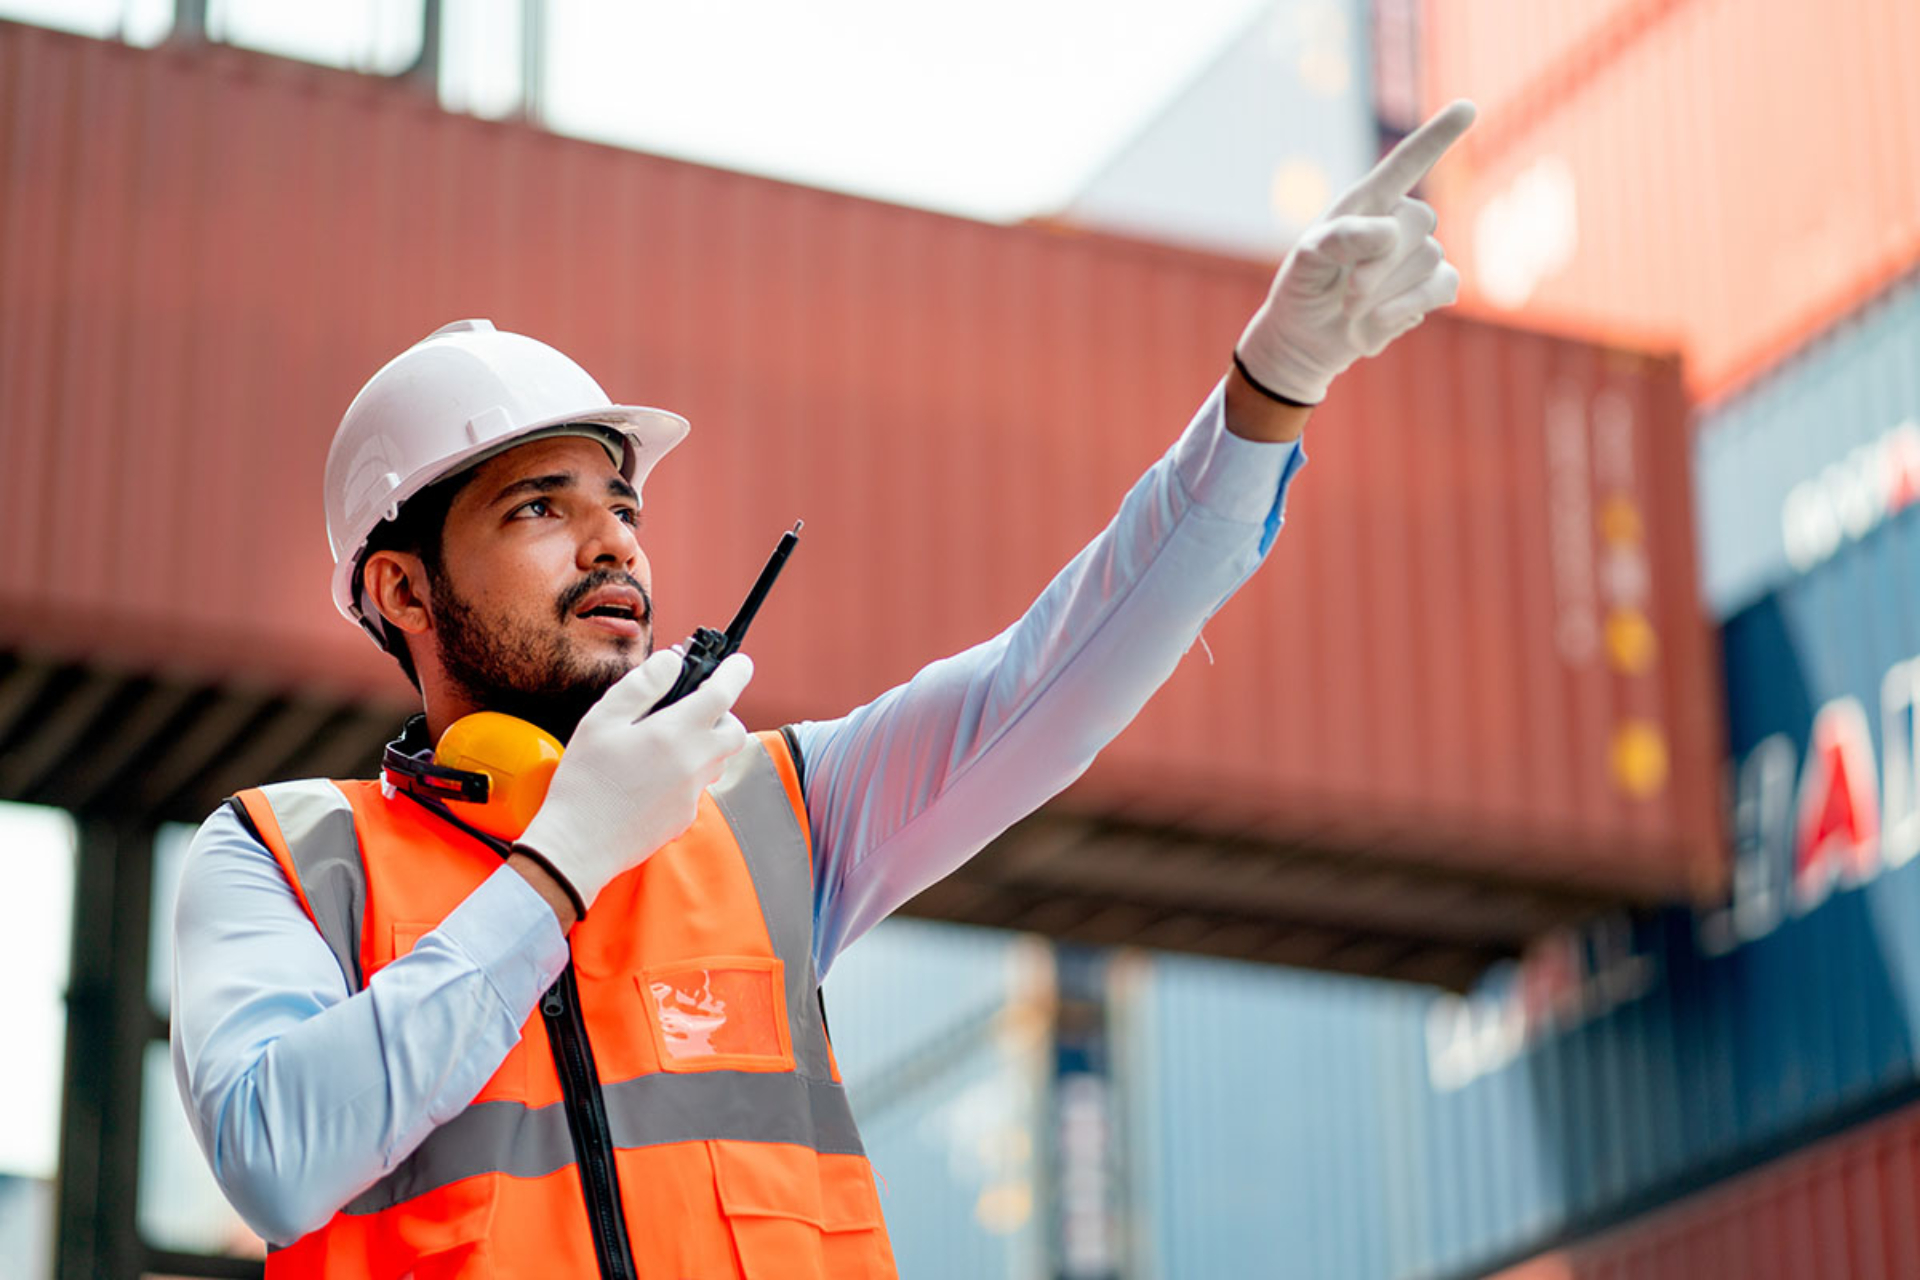 A man in protective gear stands in a ship yard. He is talking to someone over a radio and pointing at something in the distance.